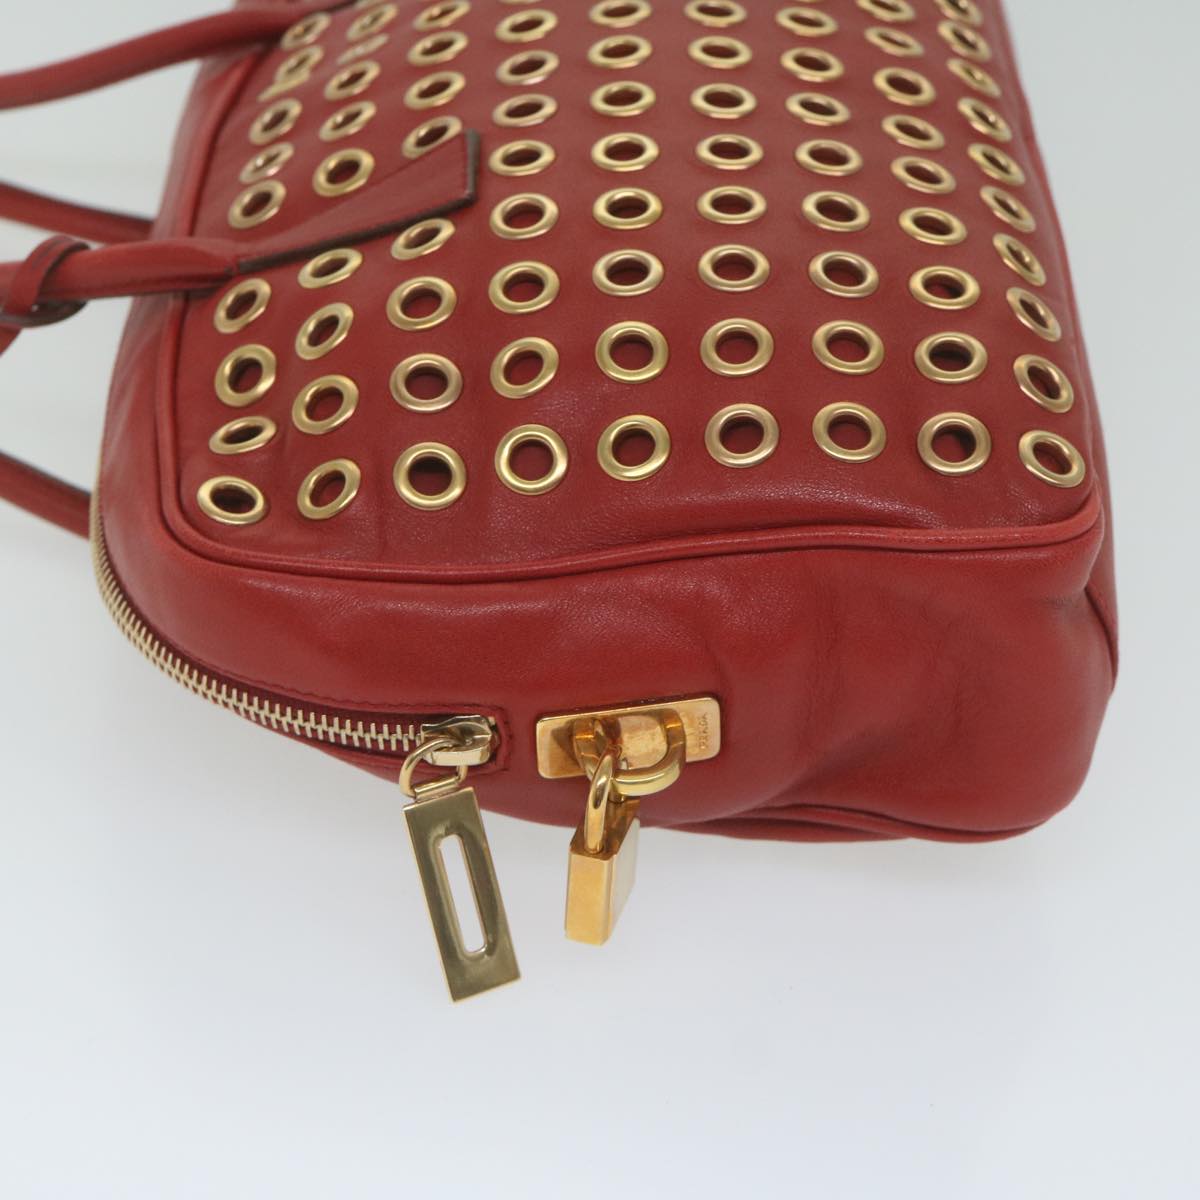 PRADA Hand Bag Leather Red Auth 61414